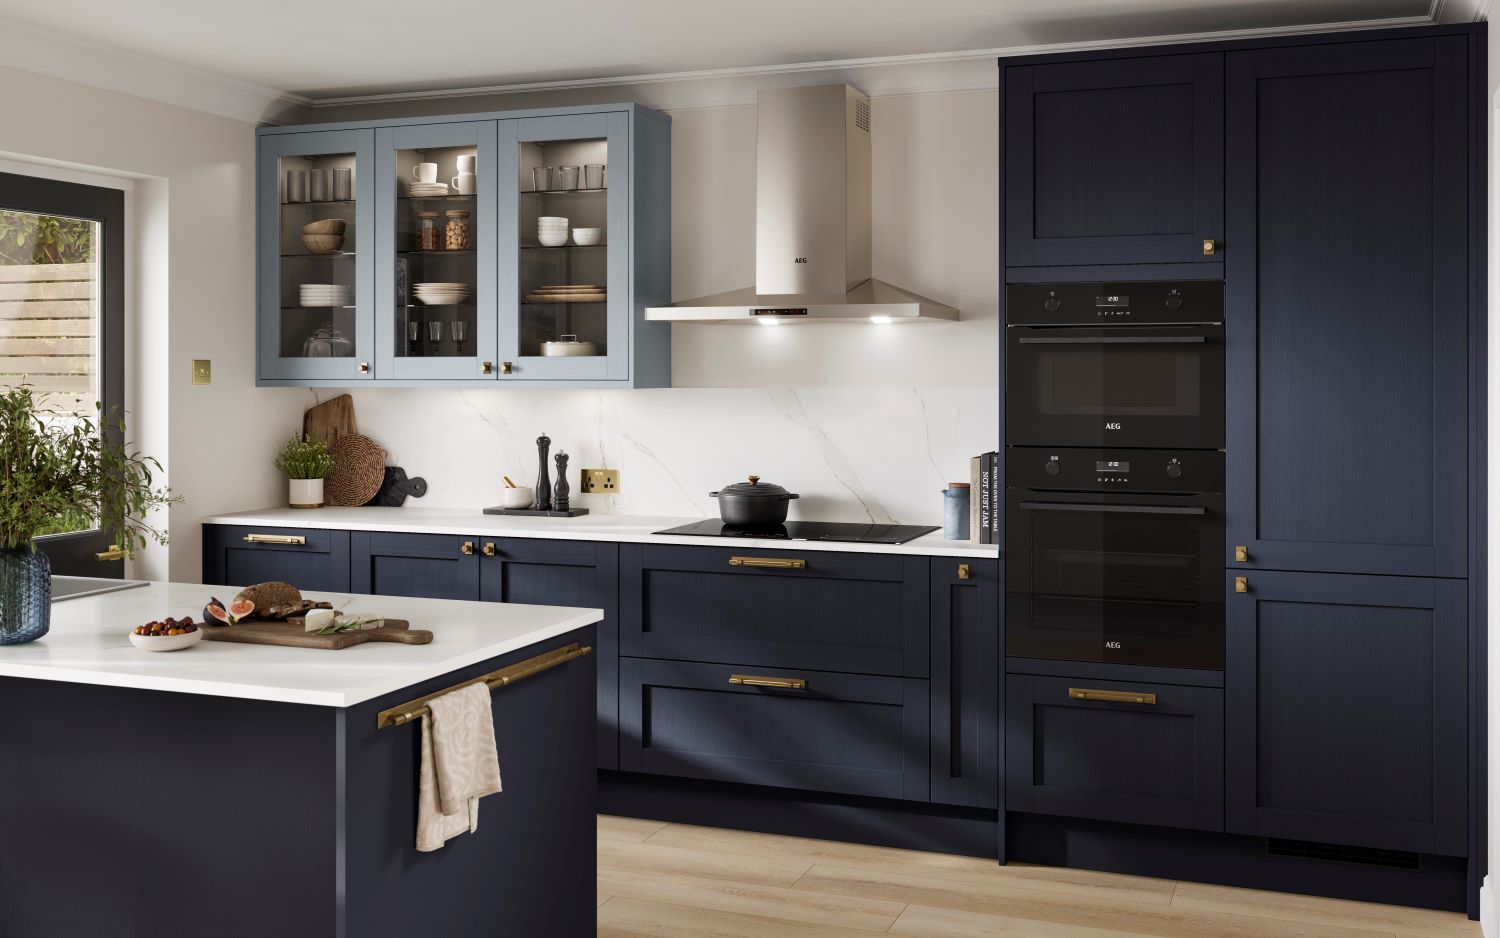 Howdens two new kitchen ranges